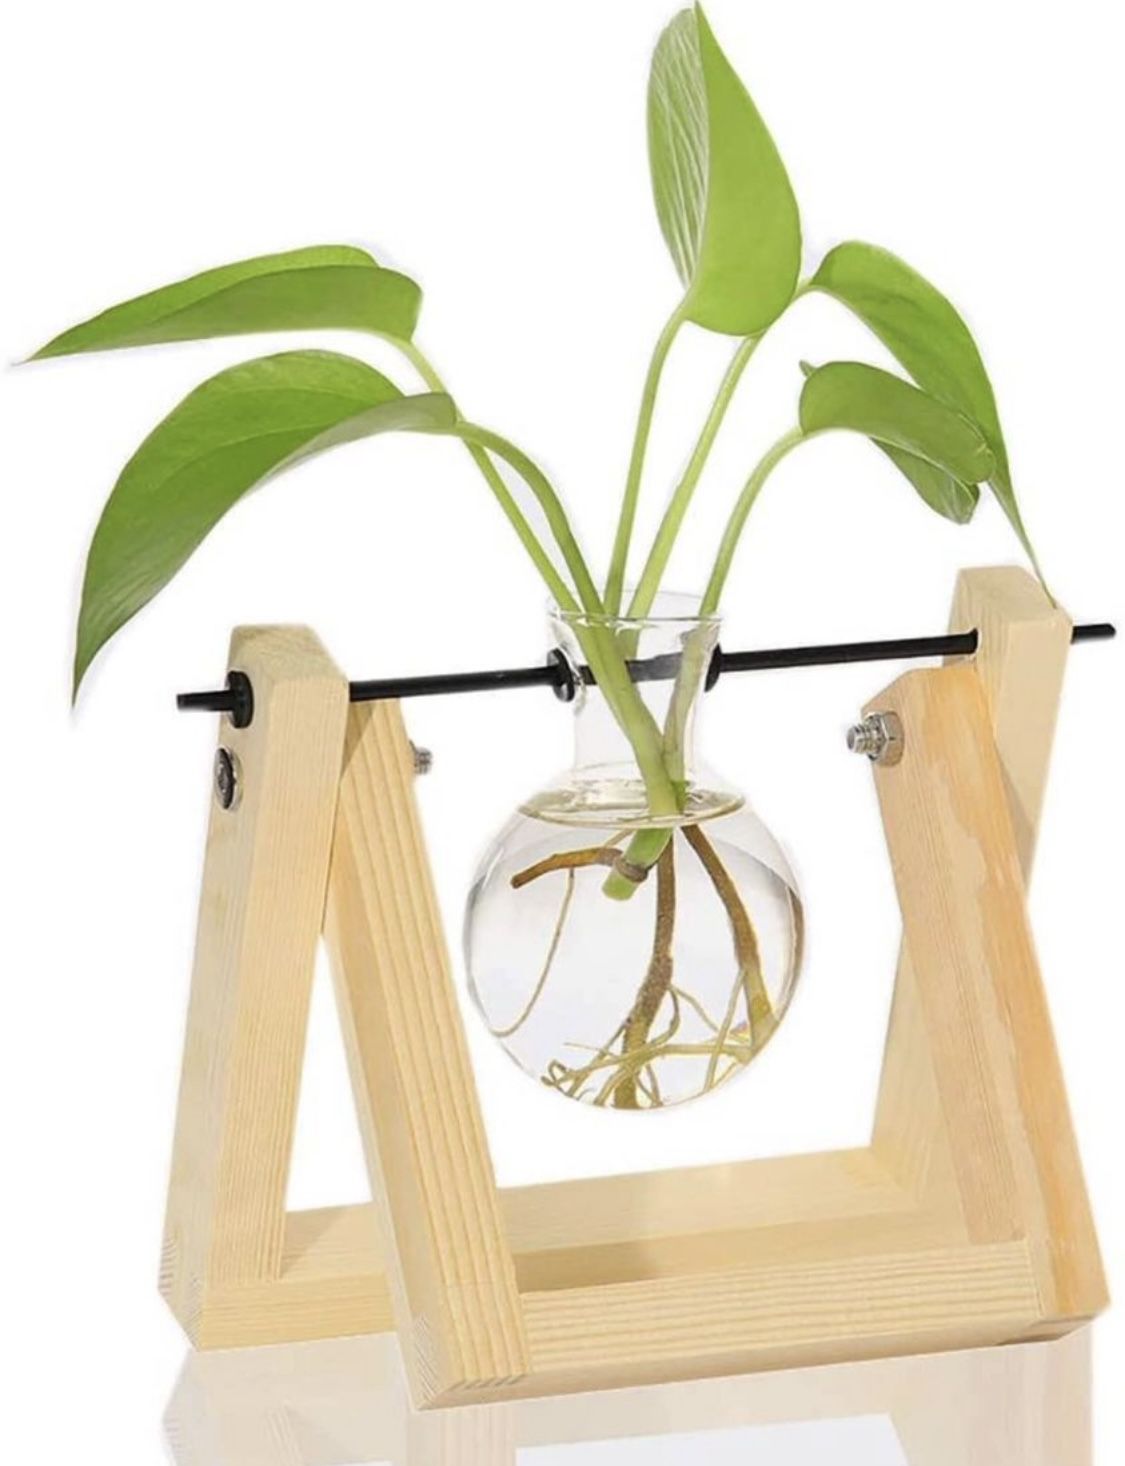 Desktop Glass Plants Terrariums Bulb Vase with Retro Solid Wooden Stand and Metal Swivel Holder for Hydroponics Plants Home Garden  New  Pick up at Re